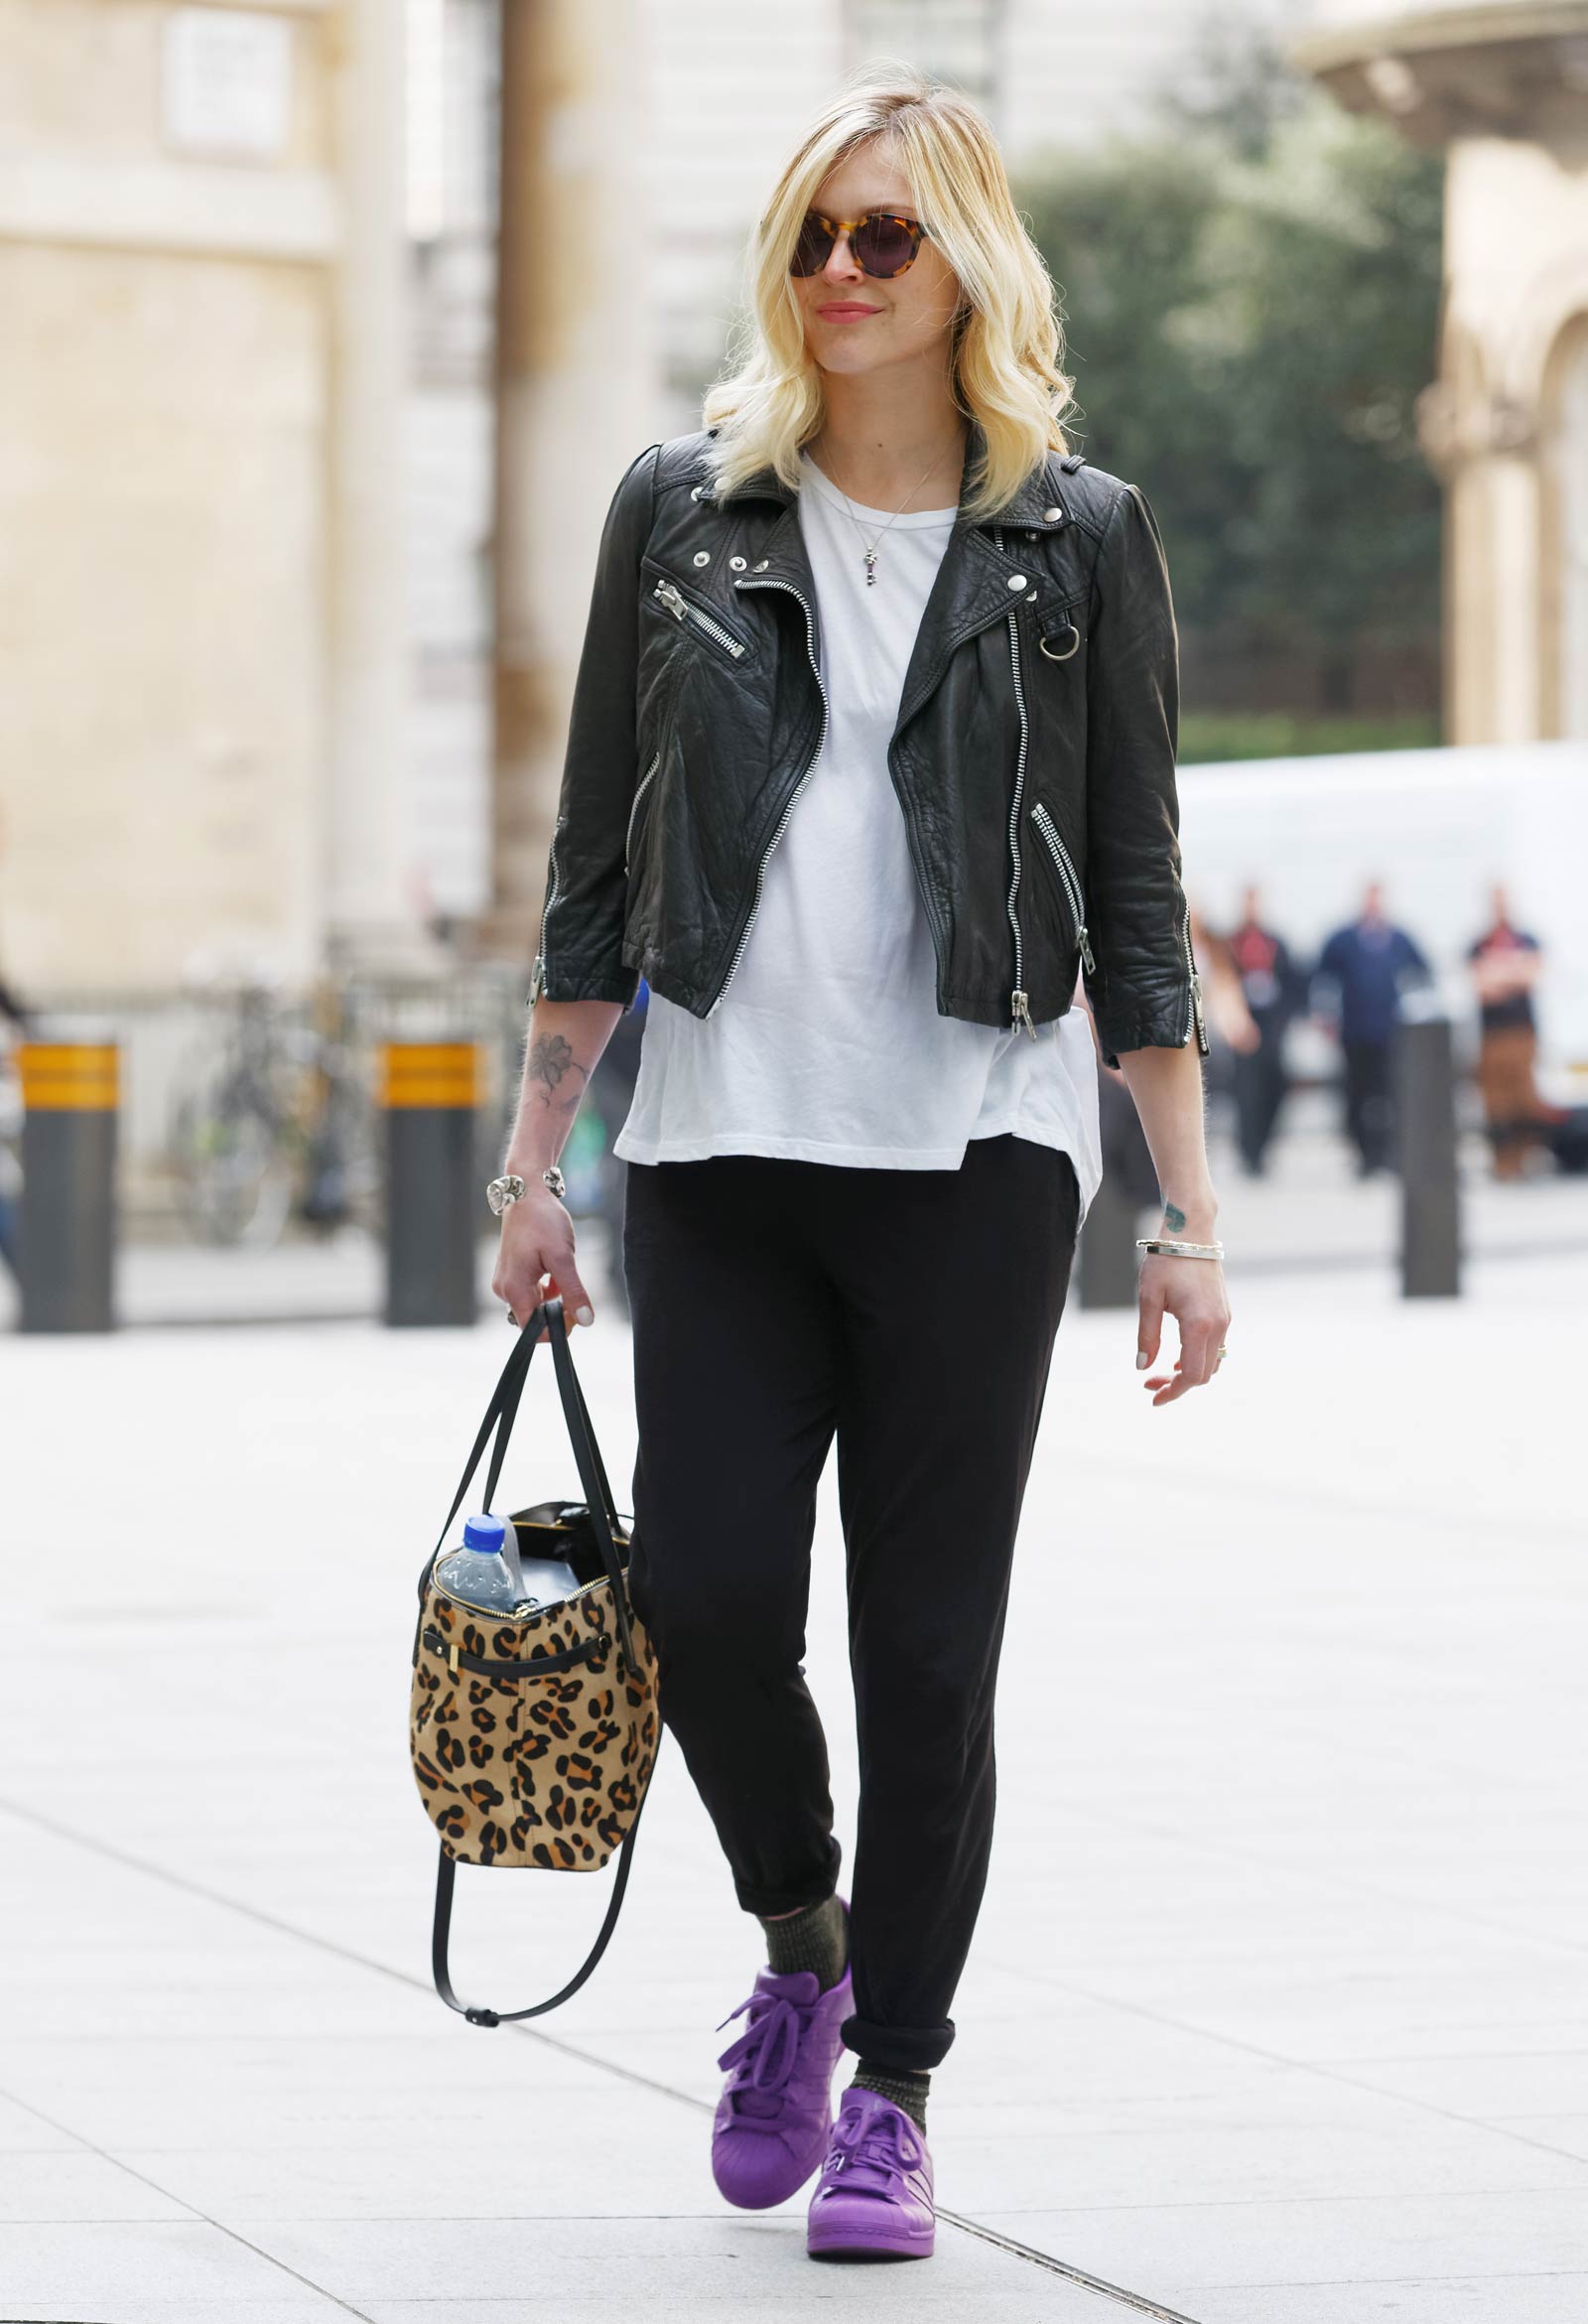 Fearne Cotton seen arriving at BBC Radio 1